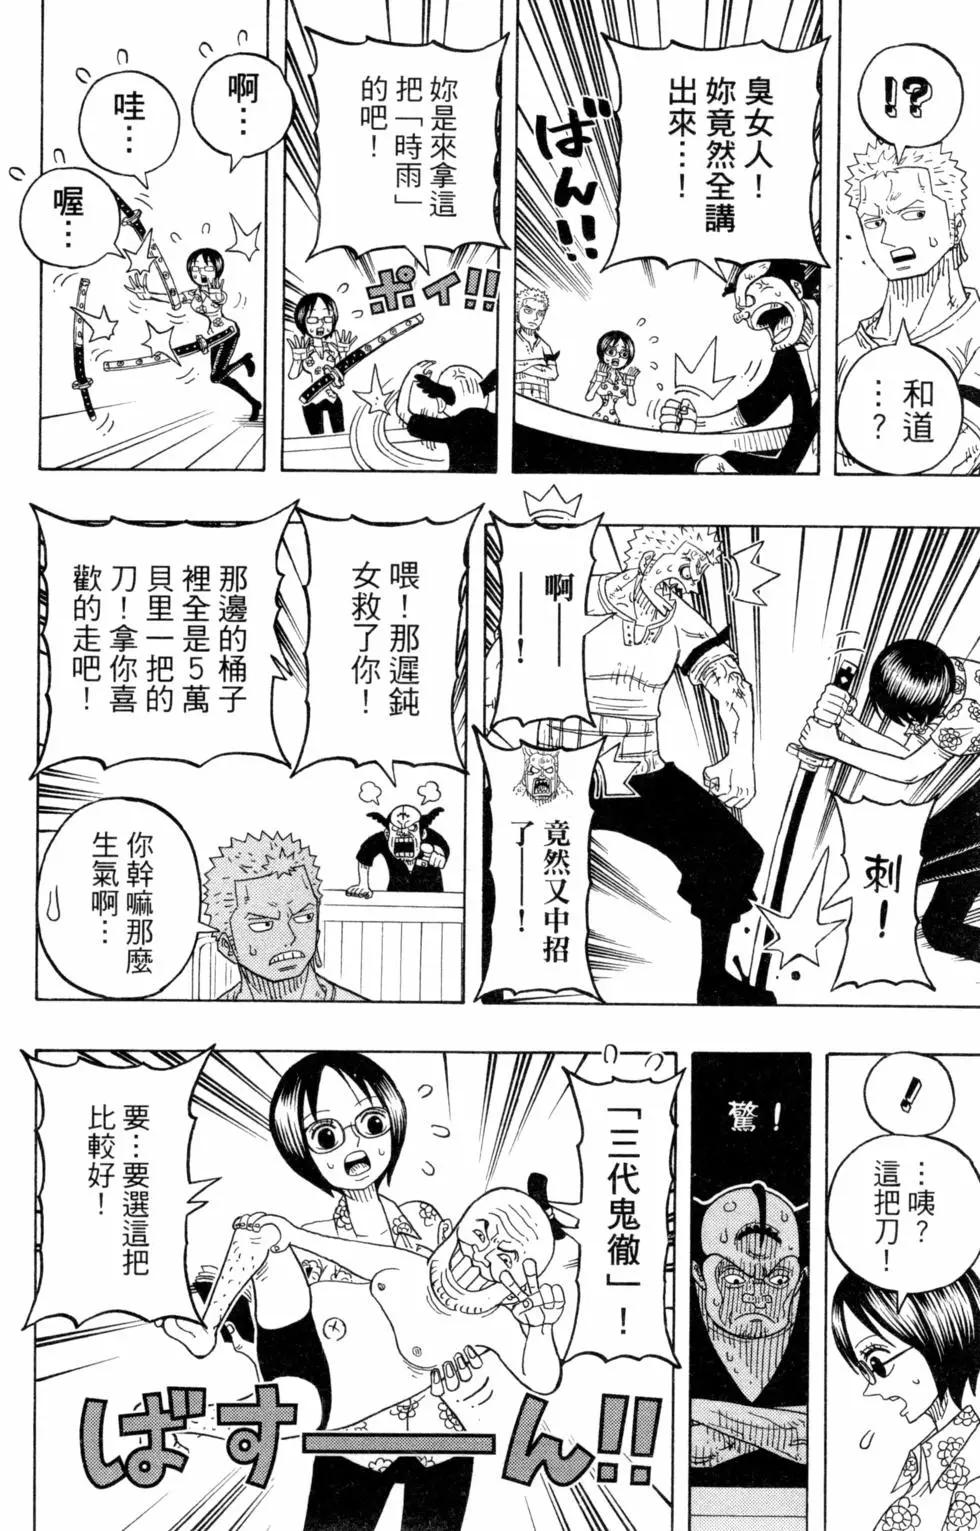 One piece party - 第06卷(2/4) - 5